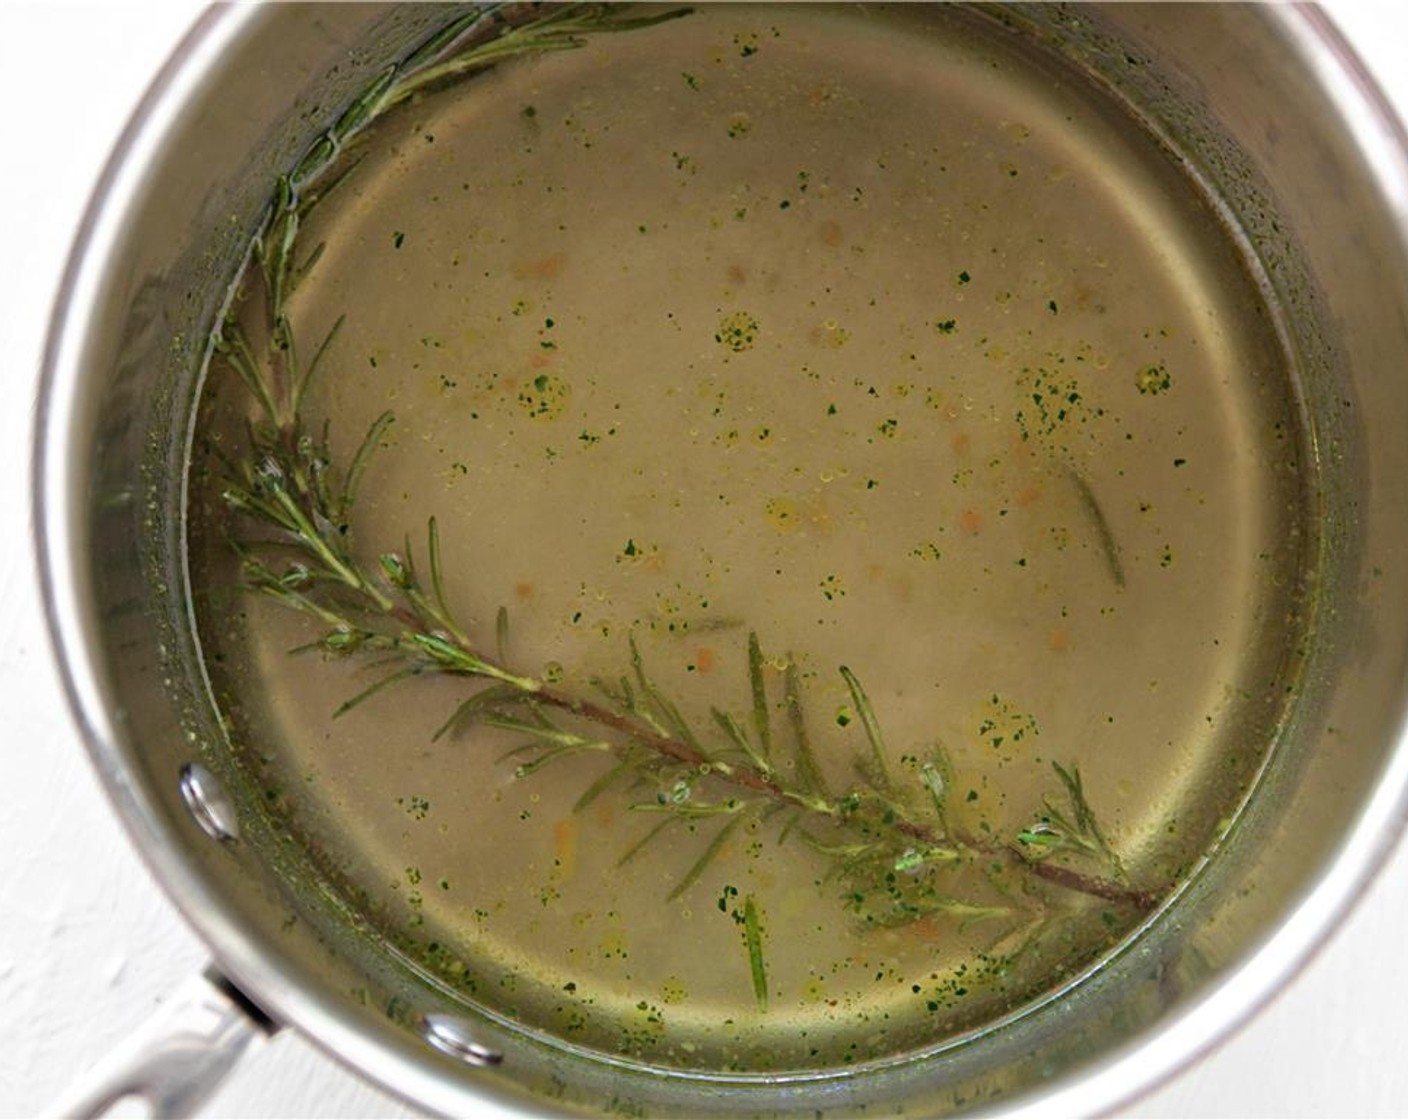 step 2 In a saucepot, combine potatoes, fresh Fresh Rosemary (2 sprigs), a pinch of Kosher Salt (to taste) and cover with water by one inch. Over high heat, bring to a boil, and remove rosemary. Turn heat down, and simmer until potatoes are tender.